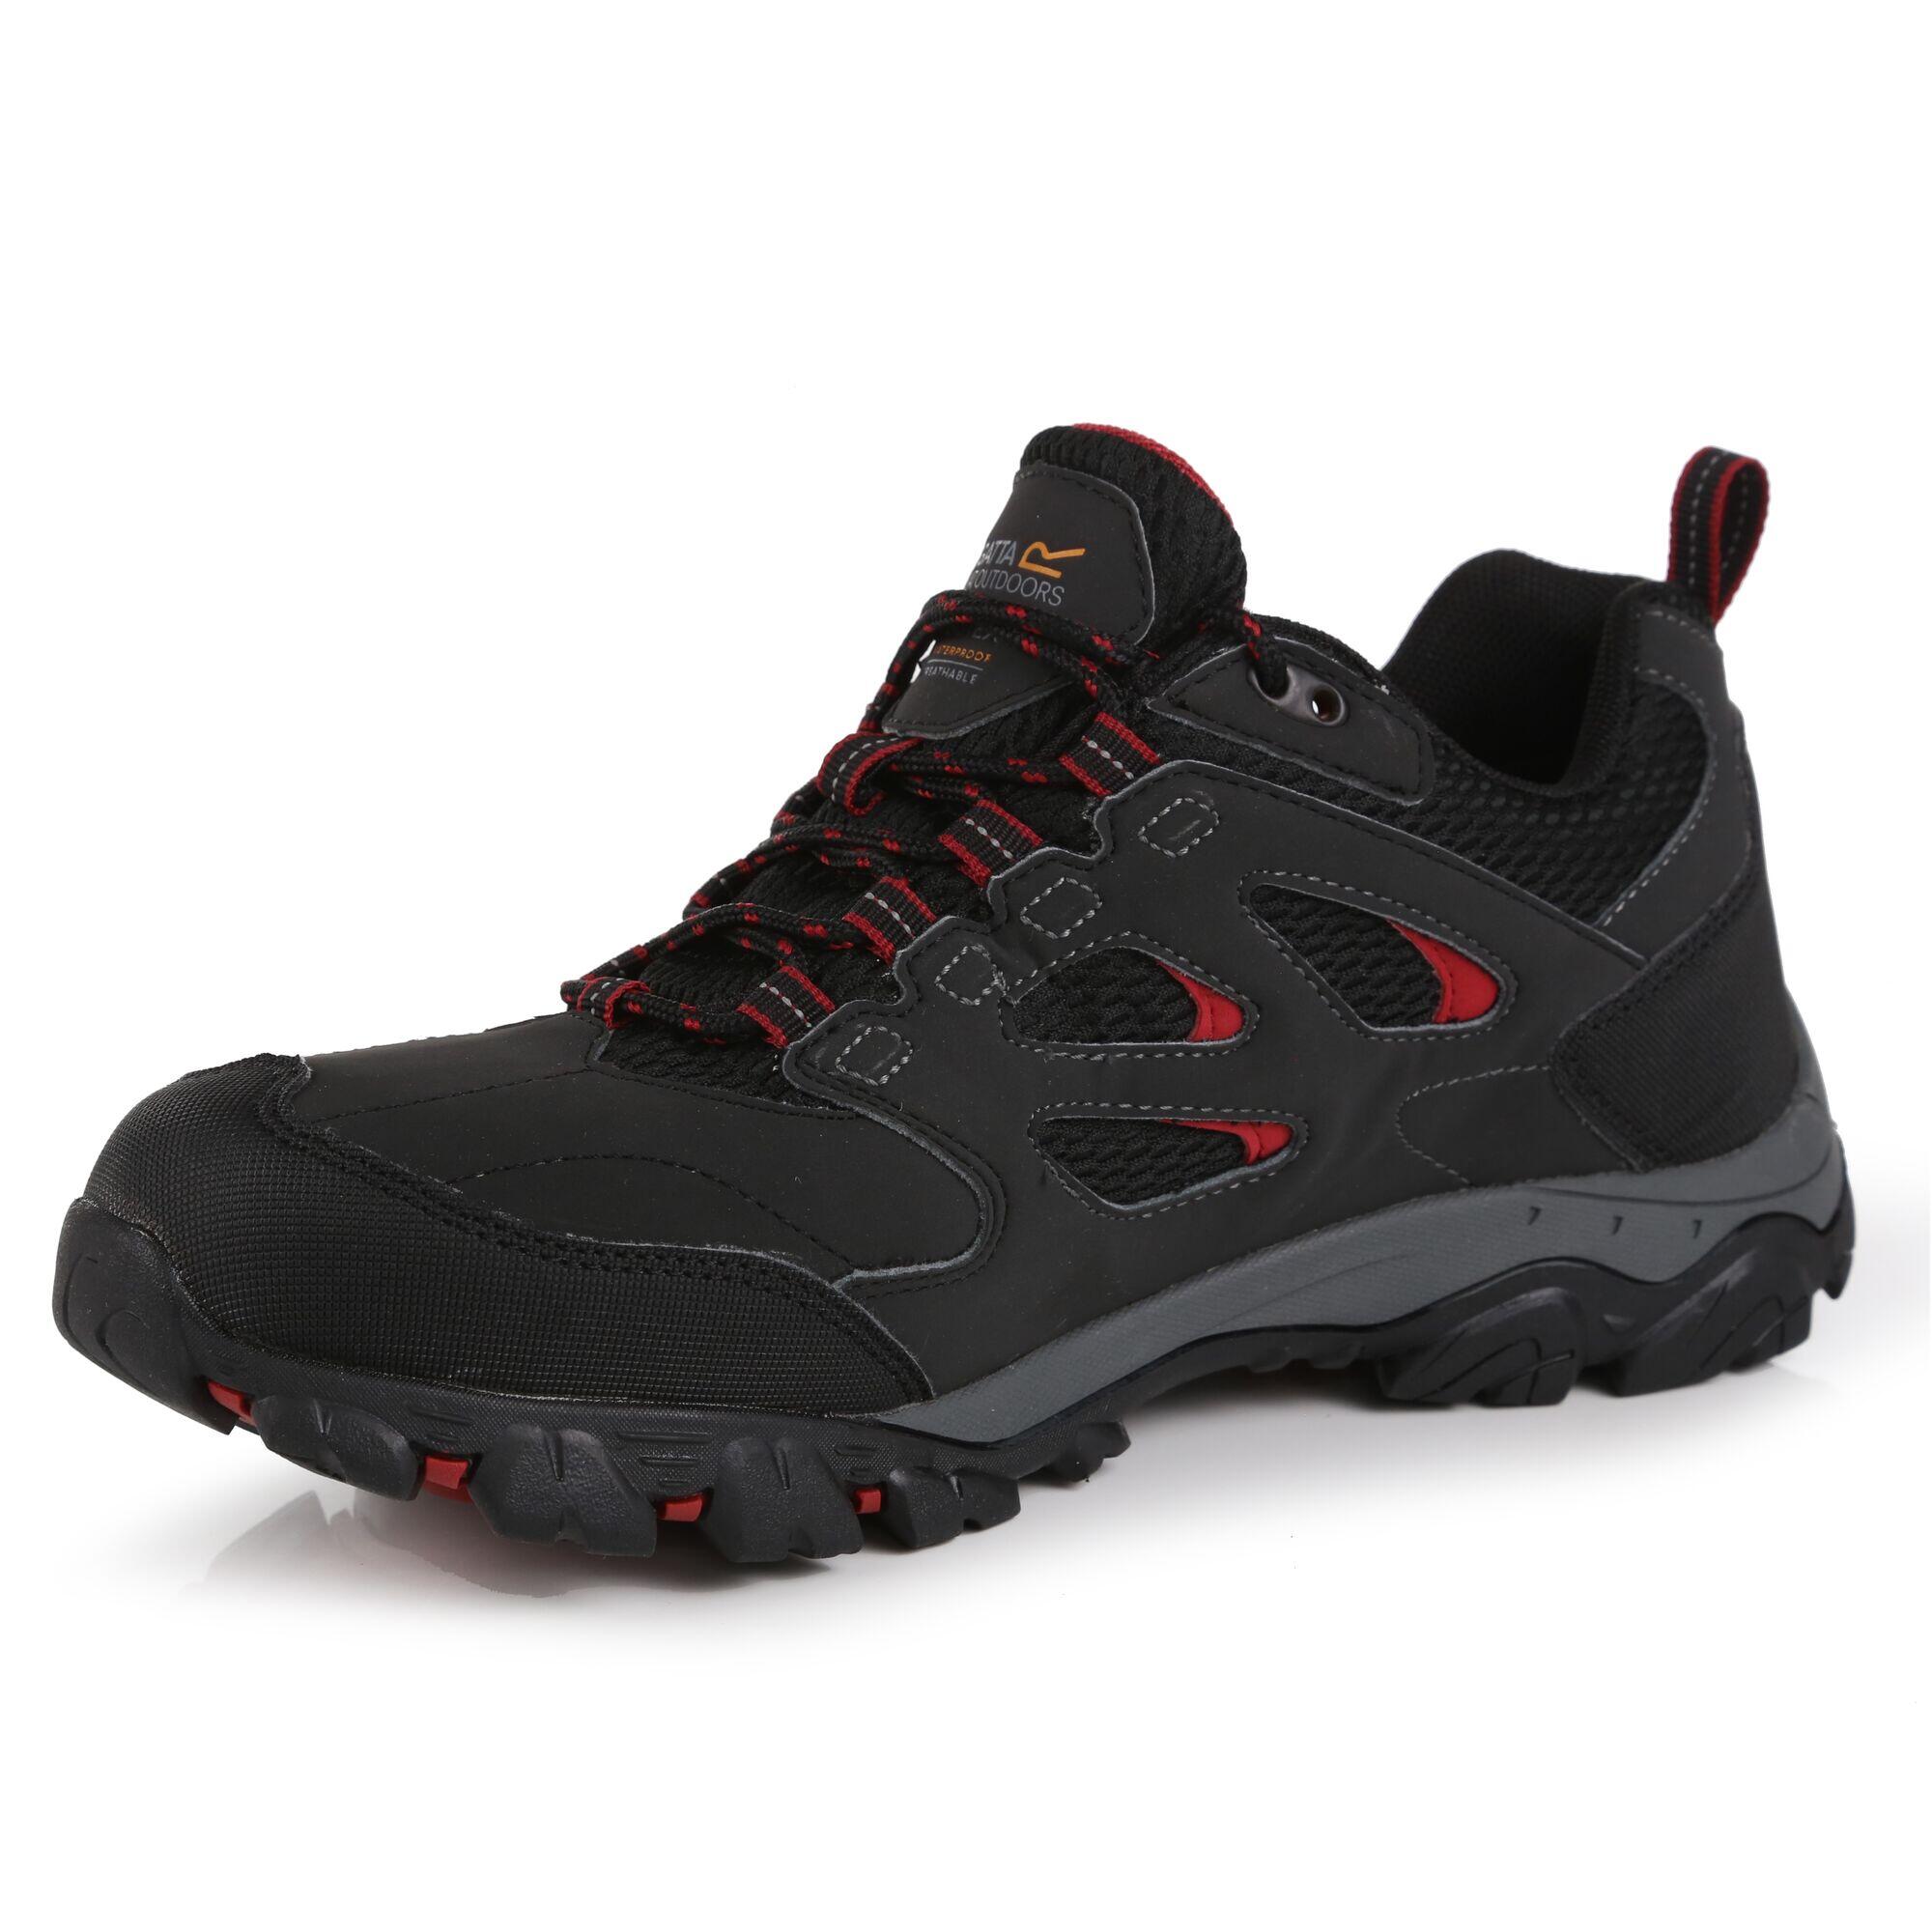 Holcombe IEP Low Men's Hiking Boots - Ash Rio Red 4/5